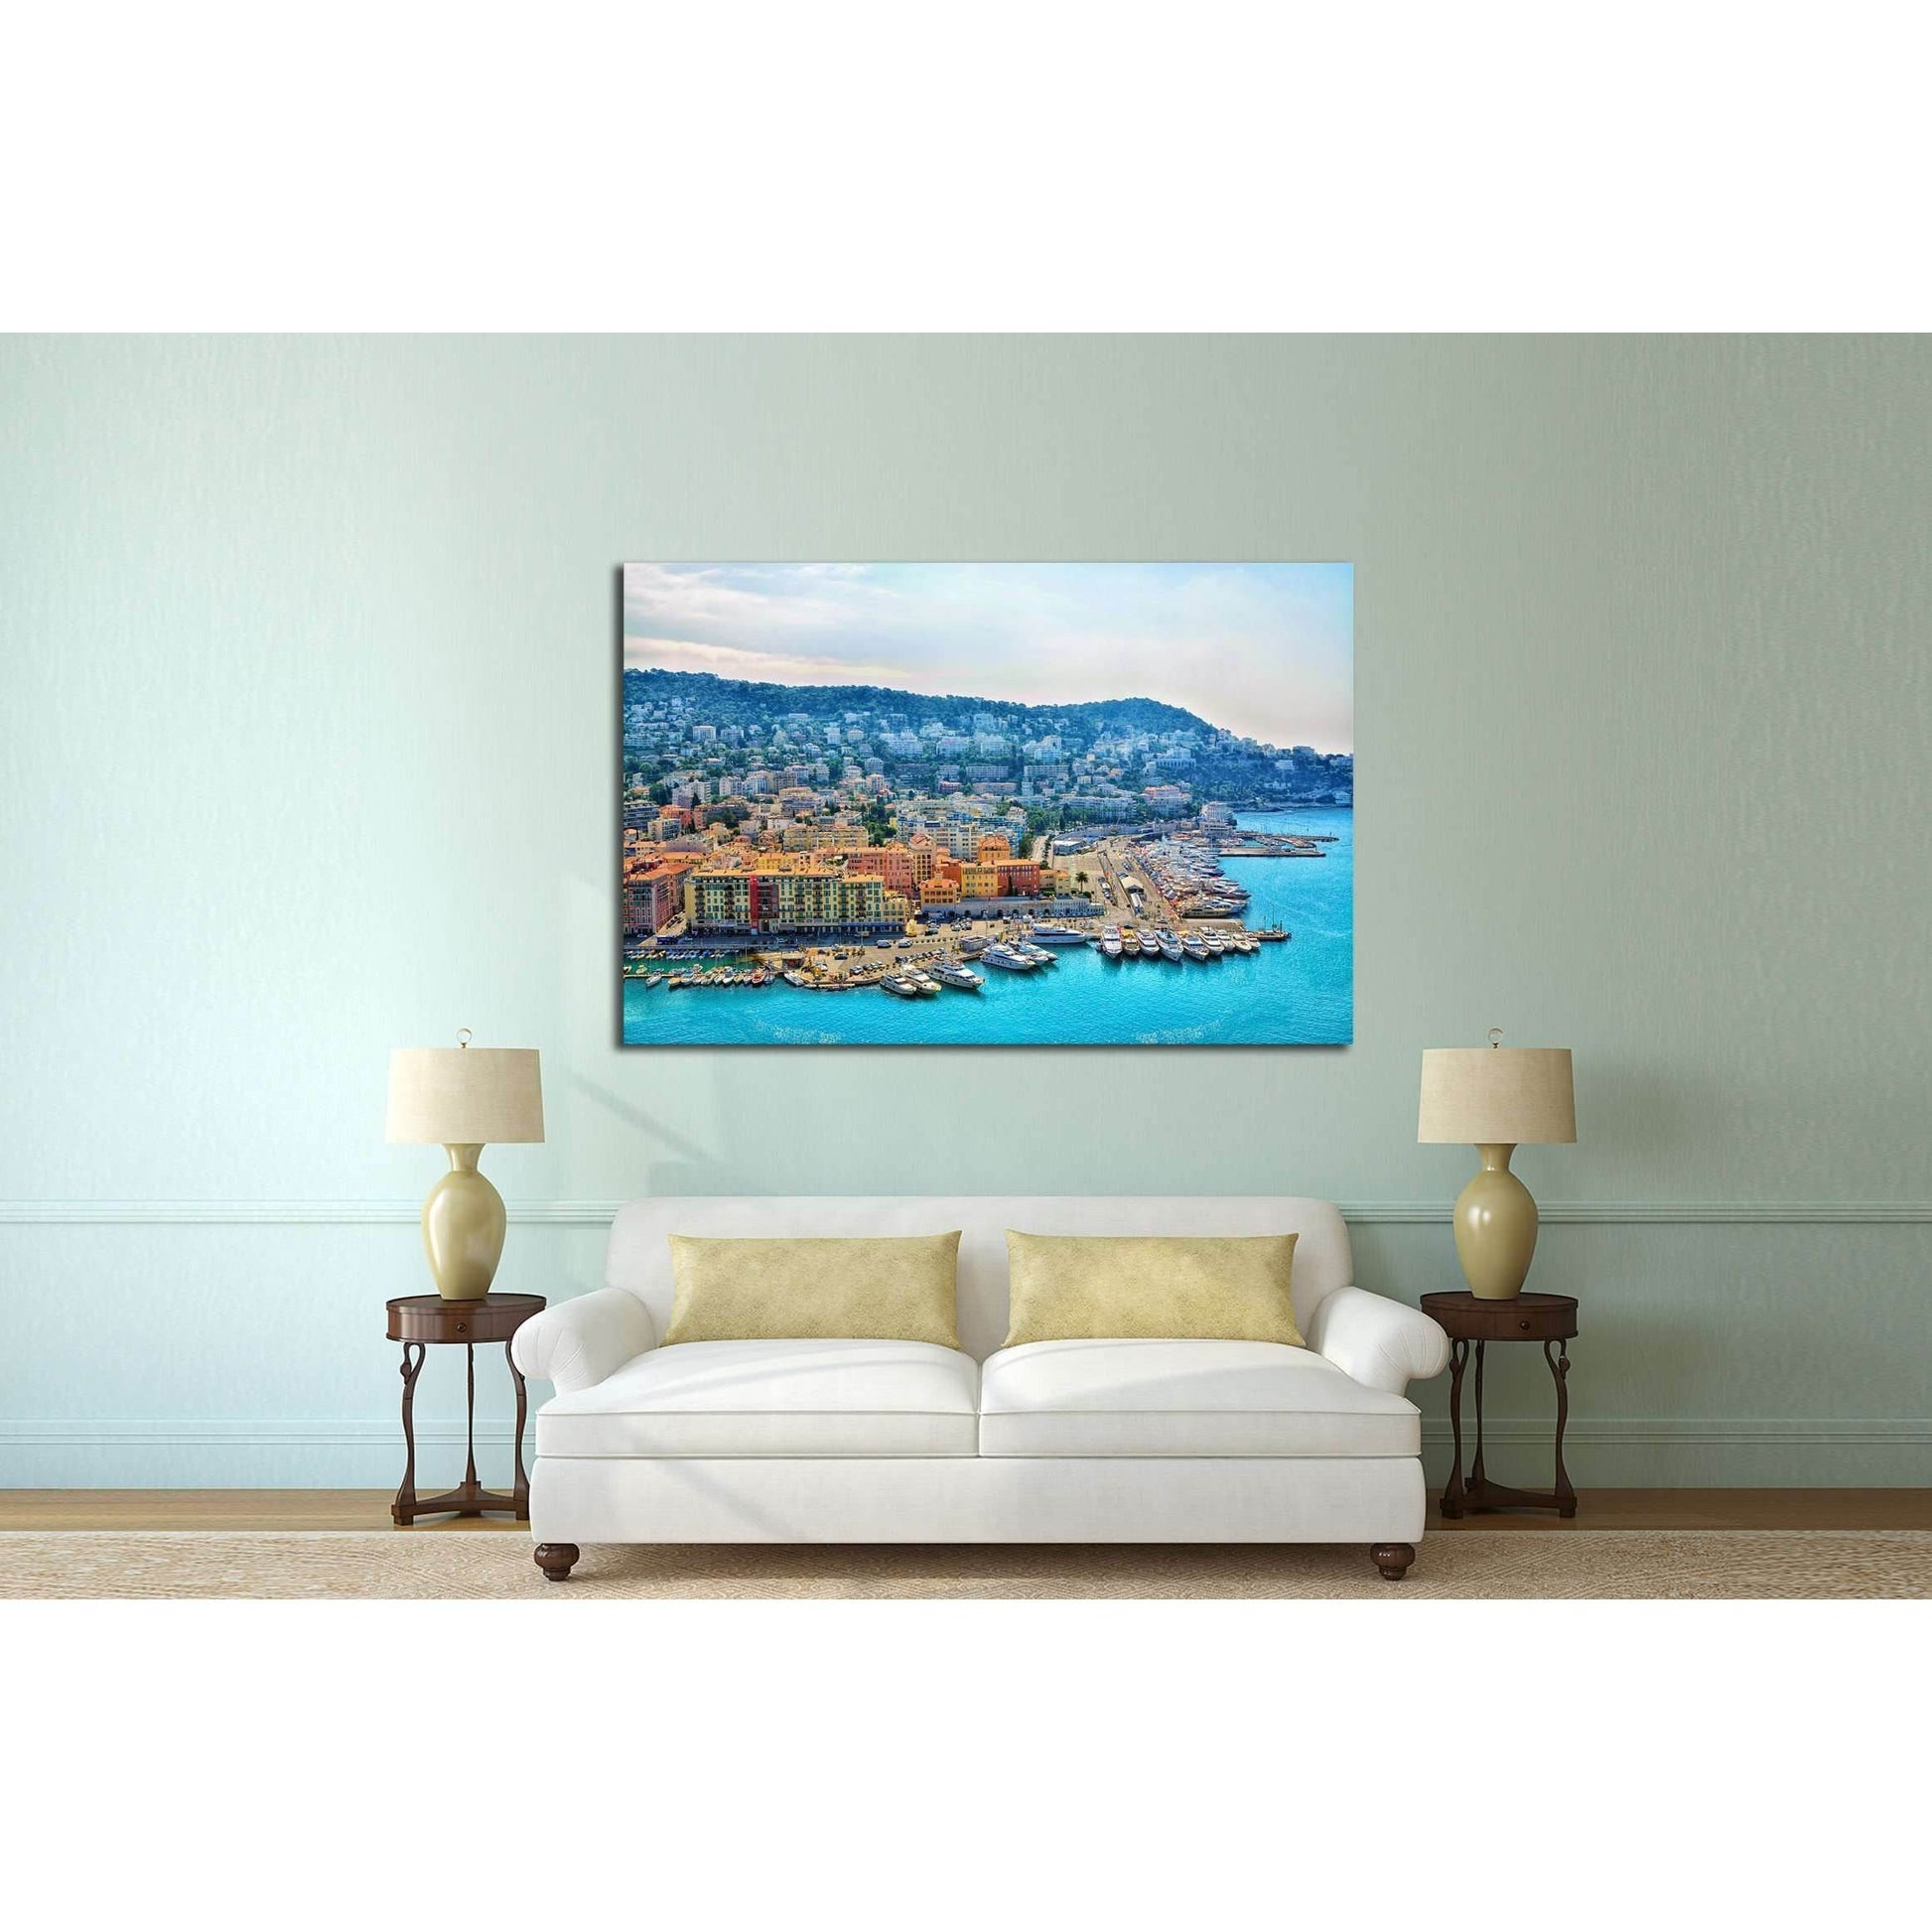 Cote d'Azur Harbor Canvas Print - French Riviera Seaside Wall ArtThis canvas print features a vibrant aerial view of the Cote d'Azur, showcasing the bustling harbor with an array of boats and the vividly colored buildings that are iconic to the French Riv